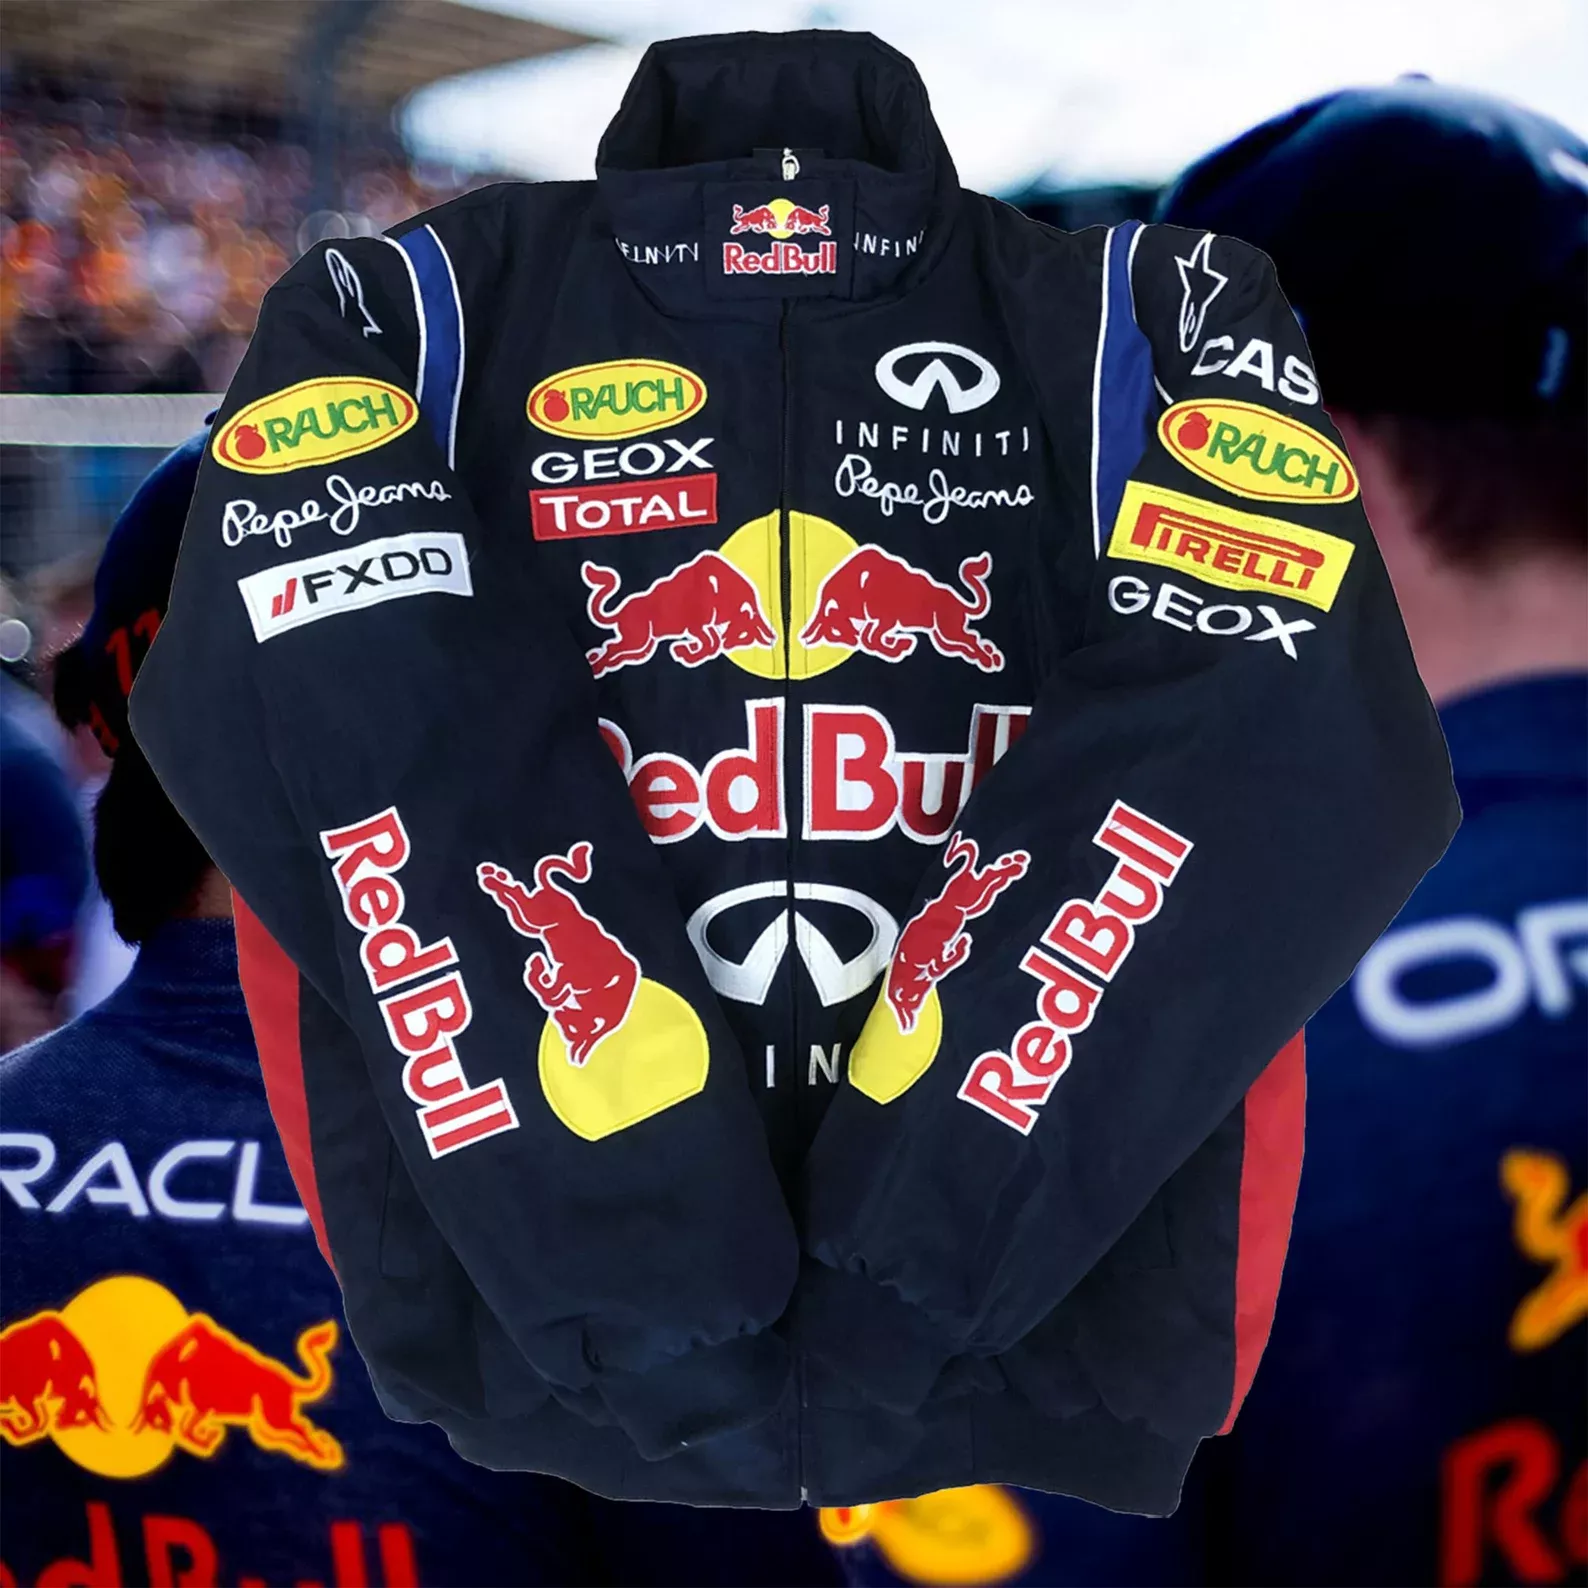 Red Bull, Jackets & Coats, Brand New Vintage Red Bull Racing Jacket